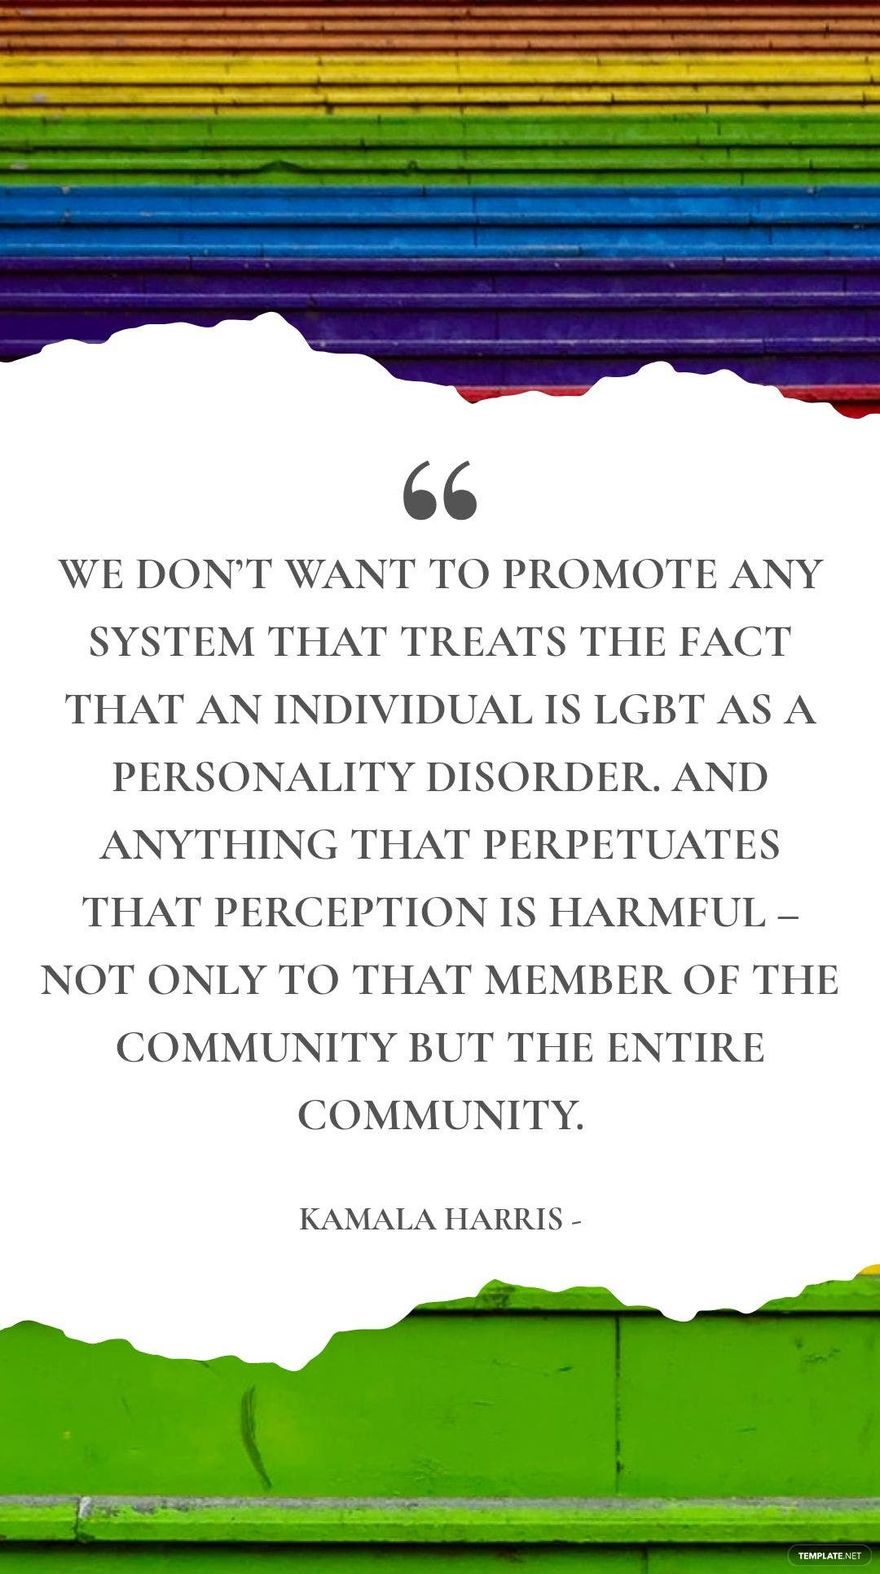 Kamala Harris - We don’t want to promote any system that treats the fact that an individual is LGBT as a personality disorder. And anything that perpetuates that perception is harmful – not only to th